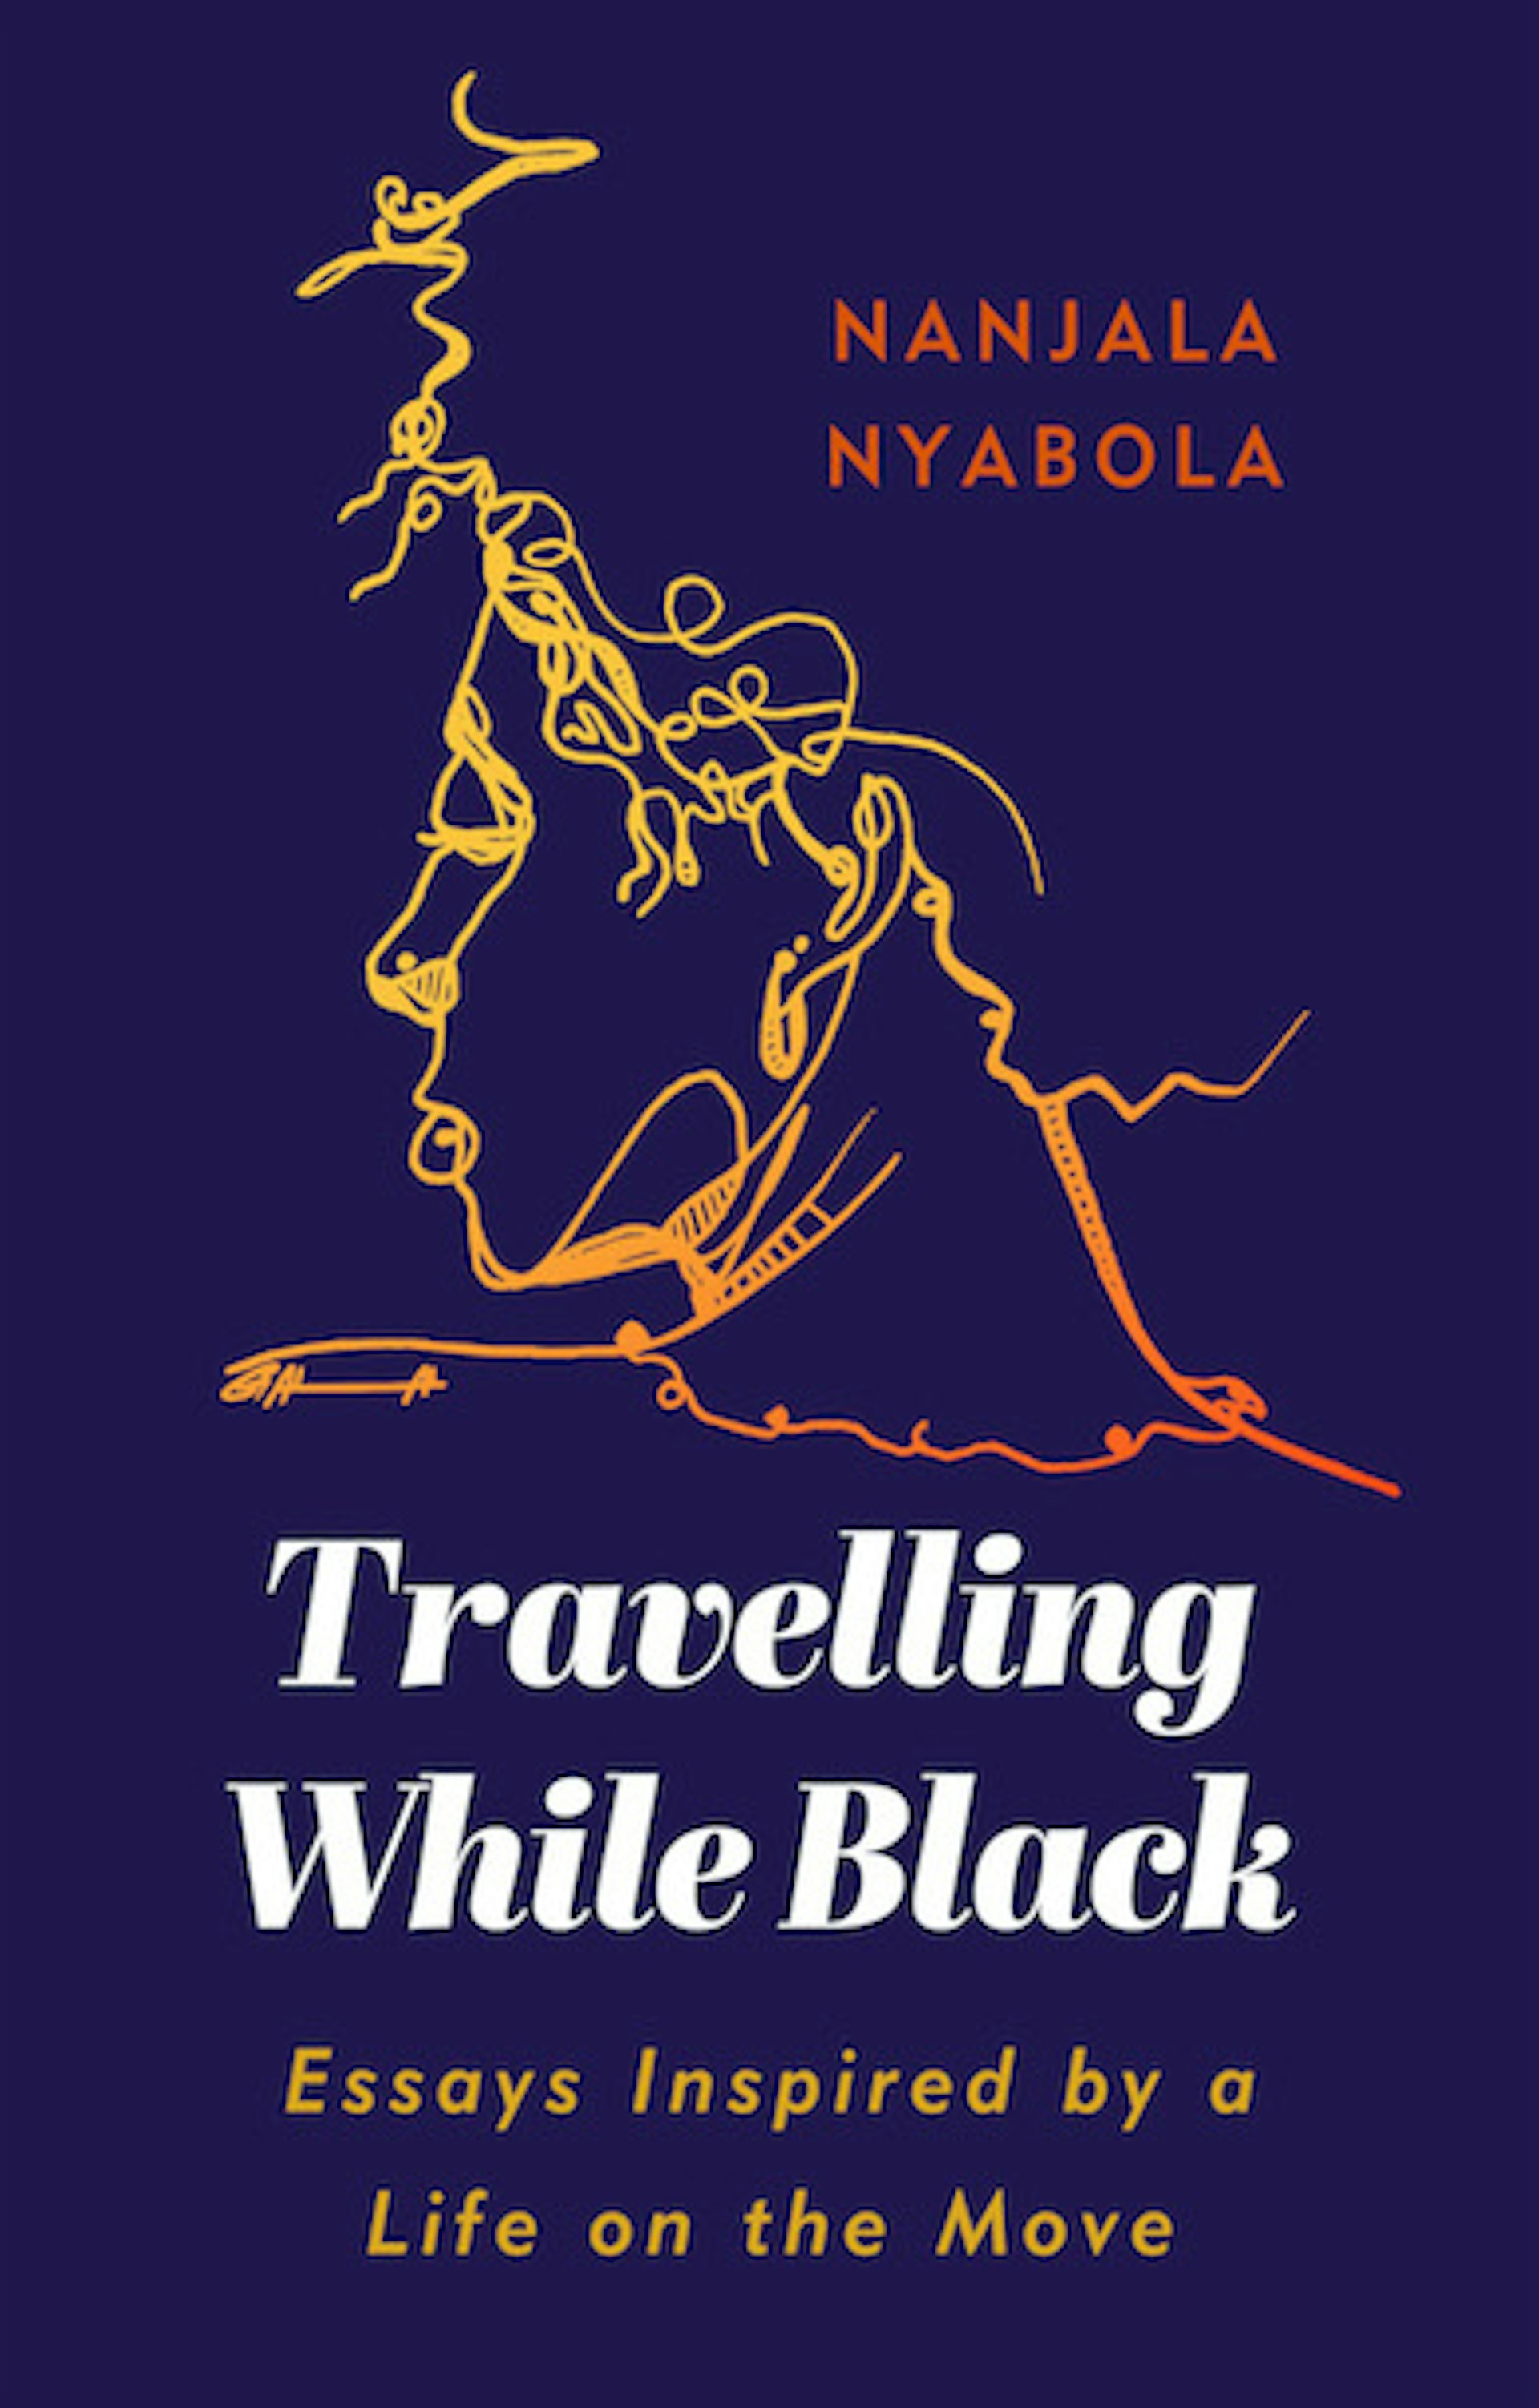 A book cover: it's navy blue with the yellow outline of a woman's face. The title is "Travelling While Black: essays inspired by a life on the move"